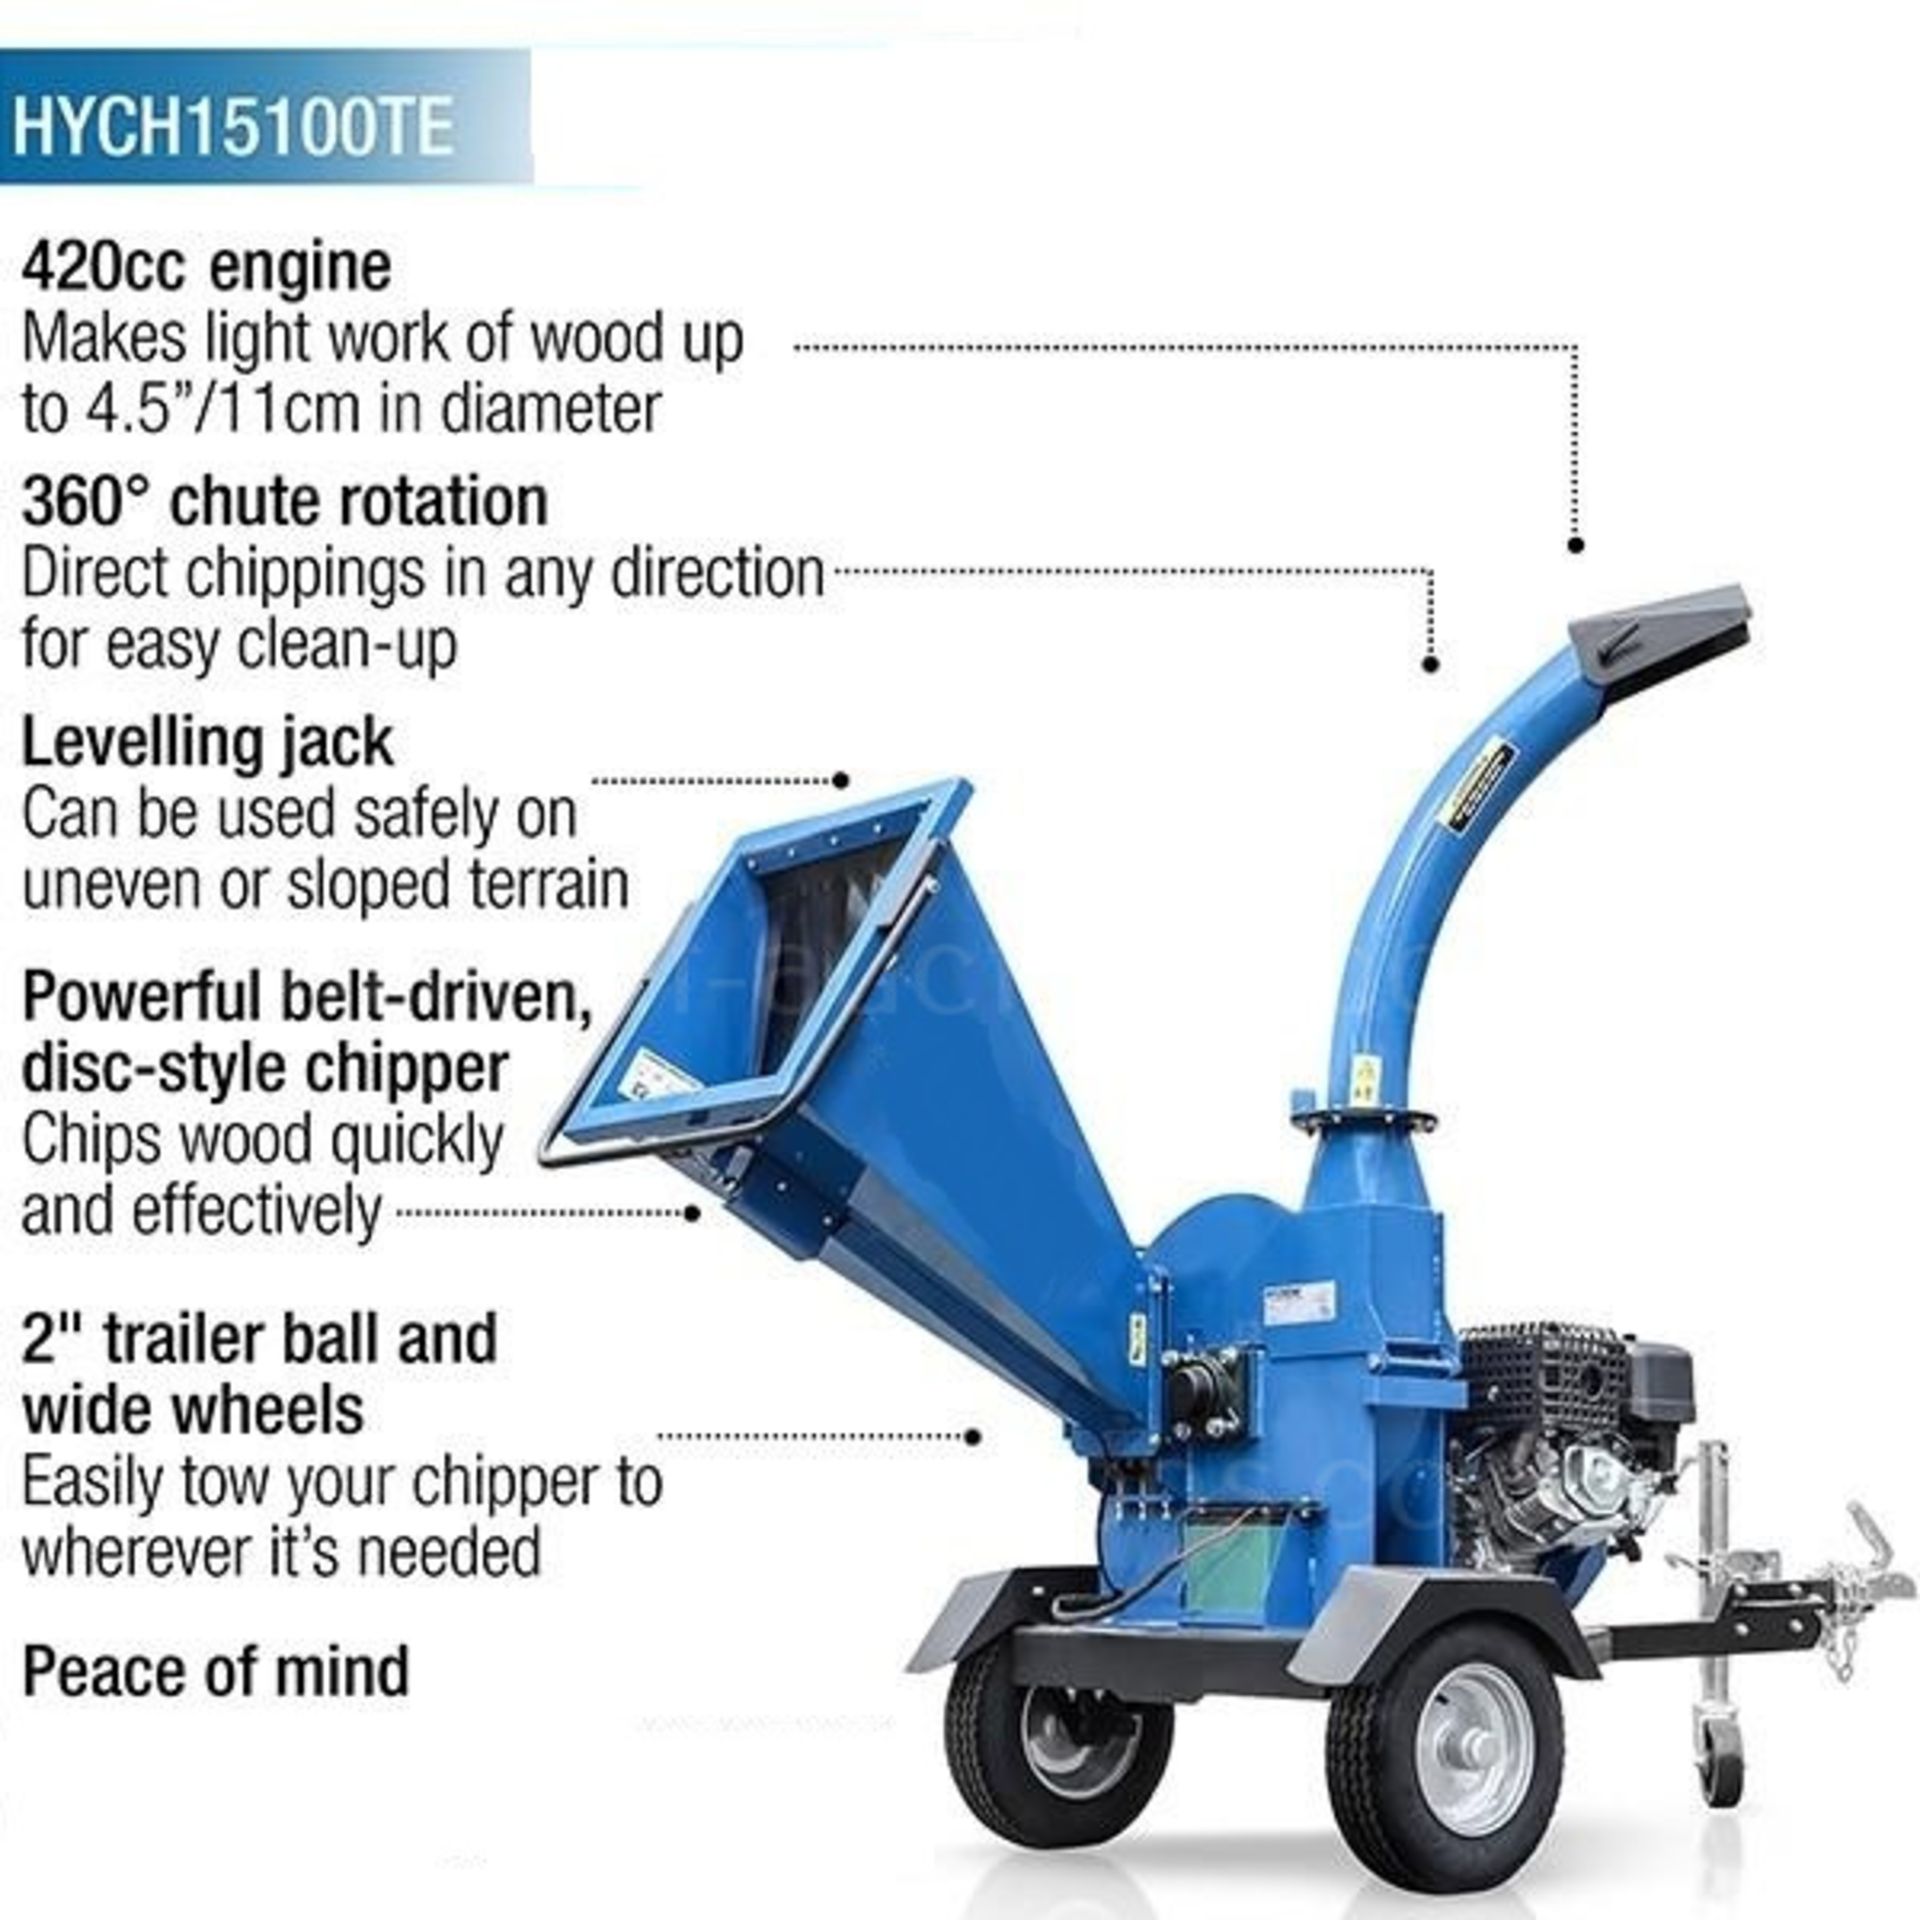 NEW AND UNUSED 15100TE 420cc 4.5" TOWABLE PETROL WOOD CHIPPER, RRP OVER £2400 *PLUS VAT* - Image 4 of 5